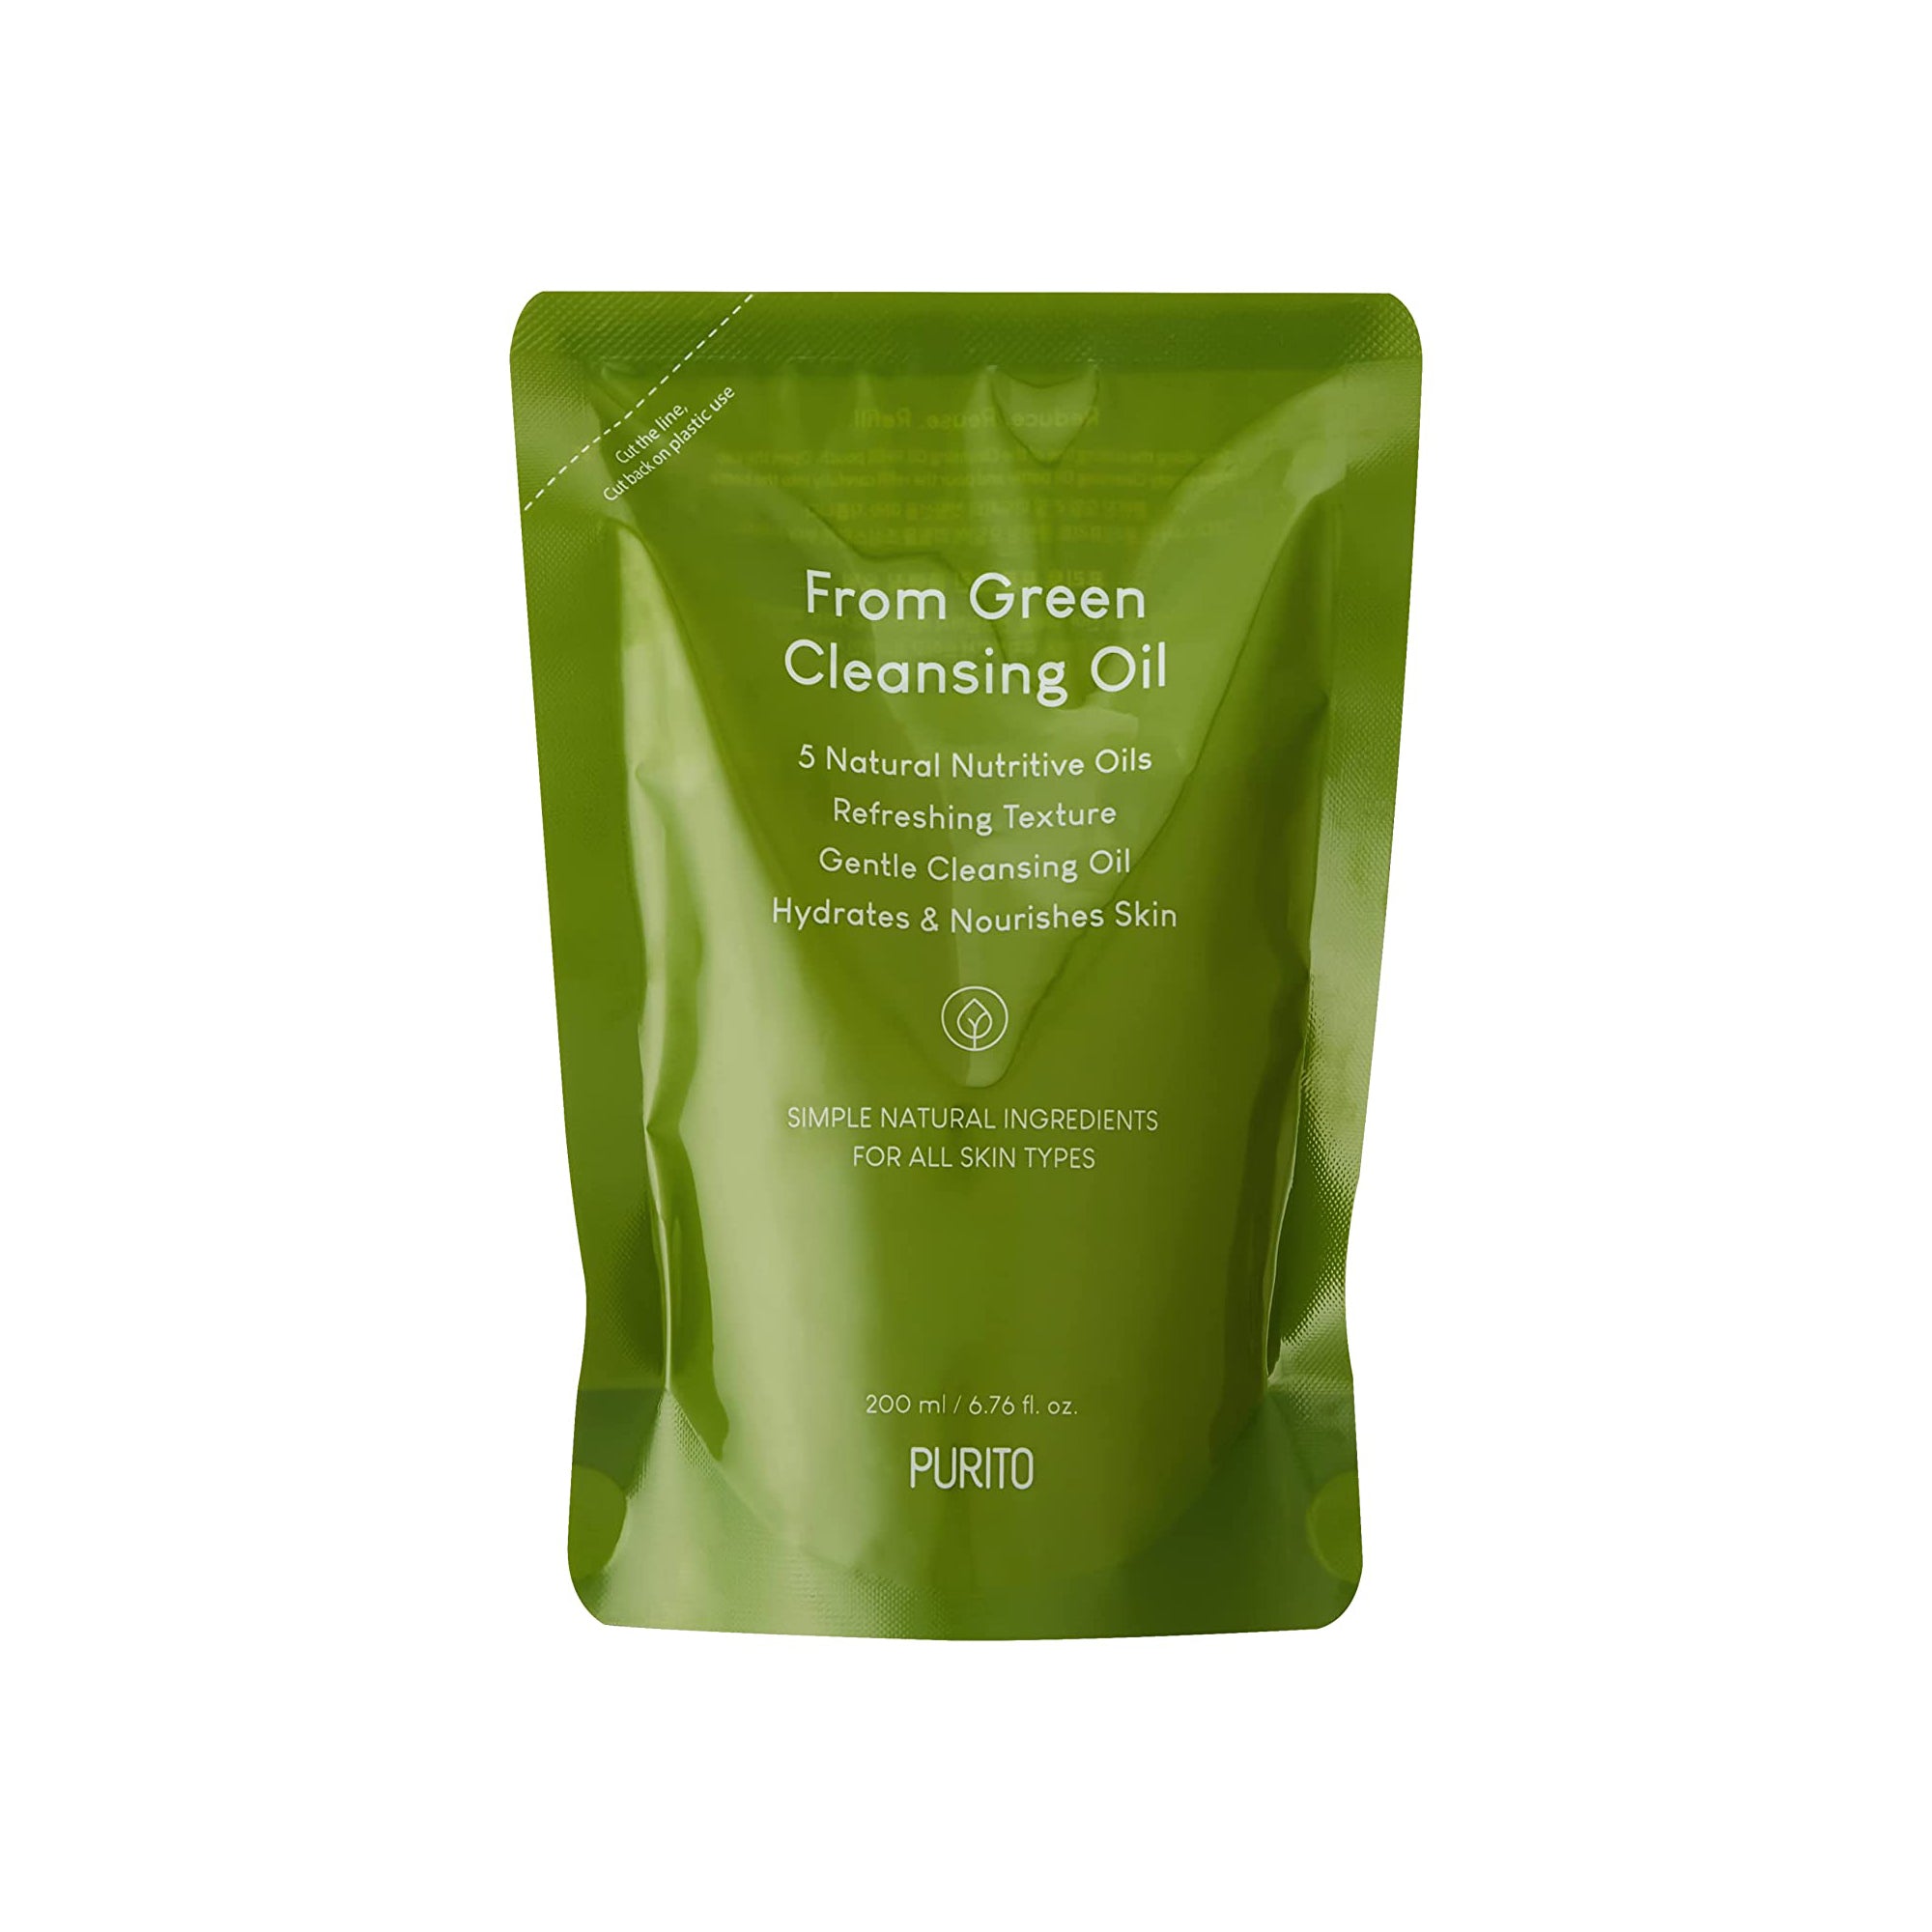 Purito From Green Cleansing Oil Refill Beauty Purito   